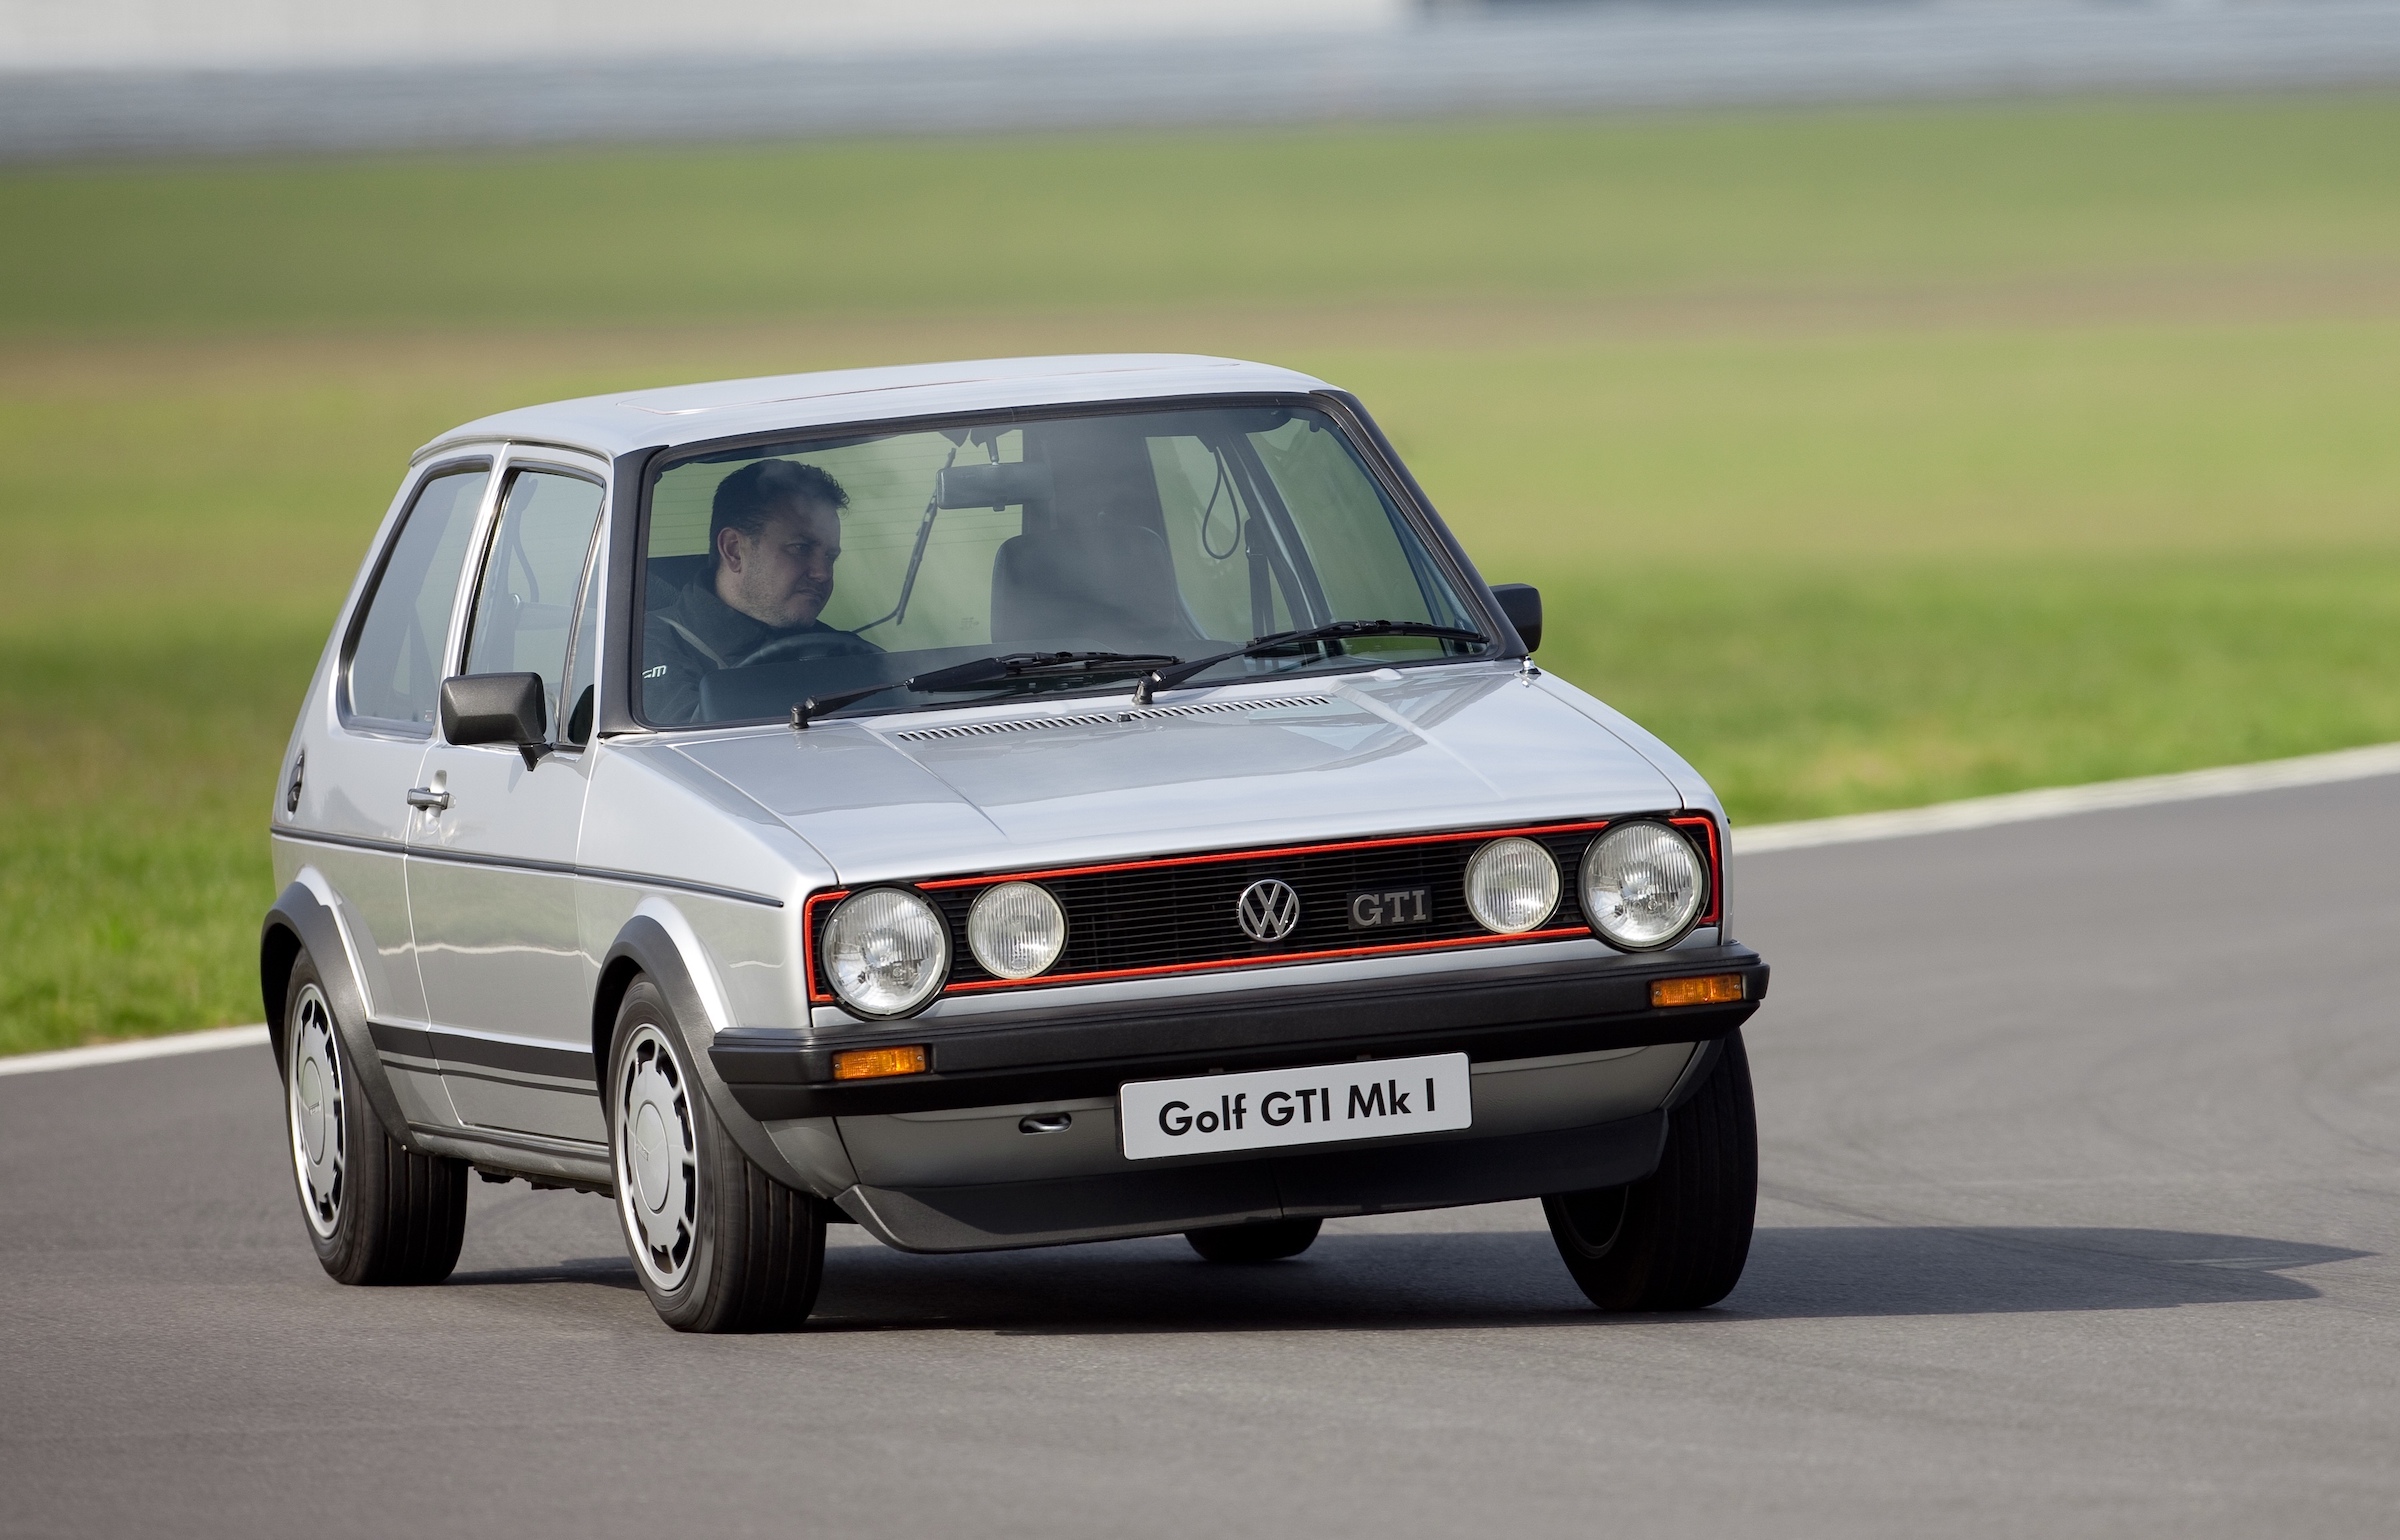 Opinion: If you only ever own one car, make it a hot hatch